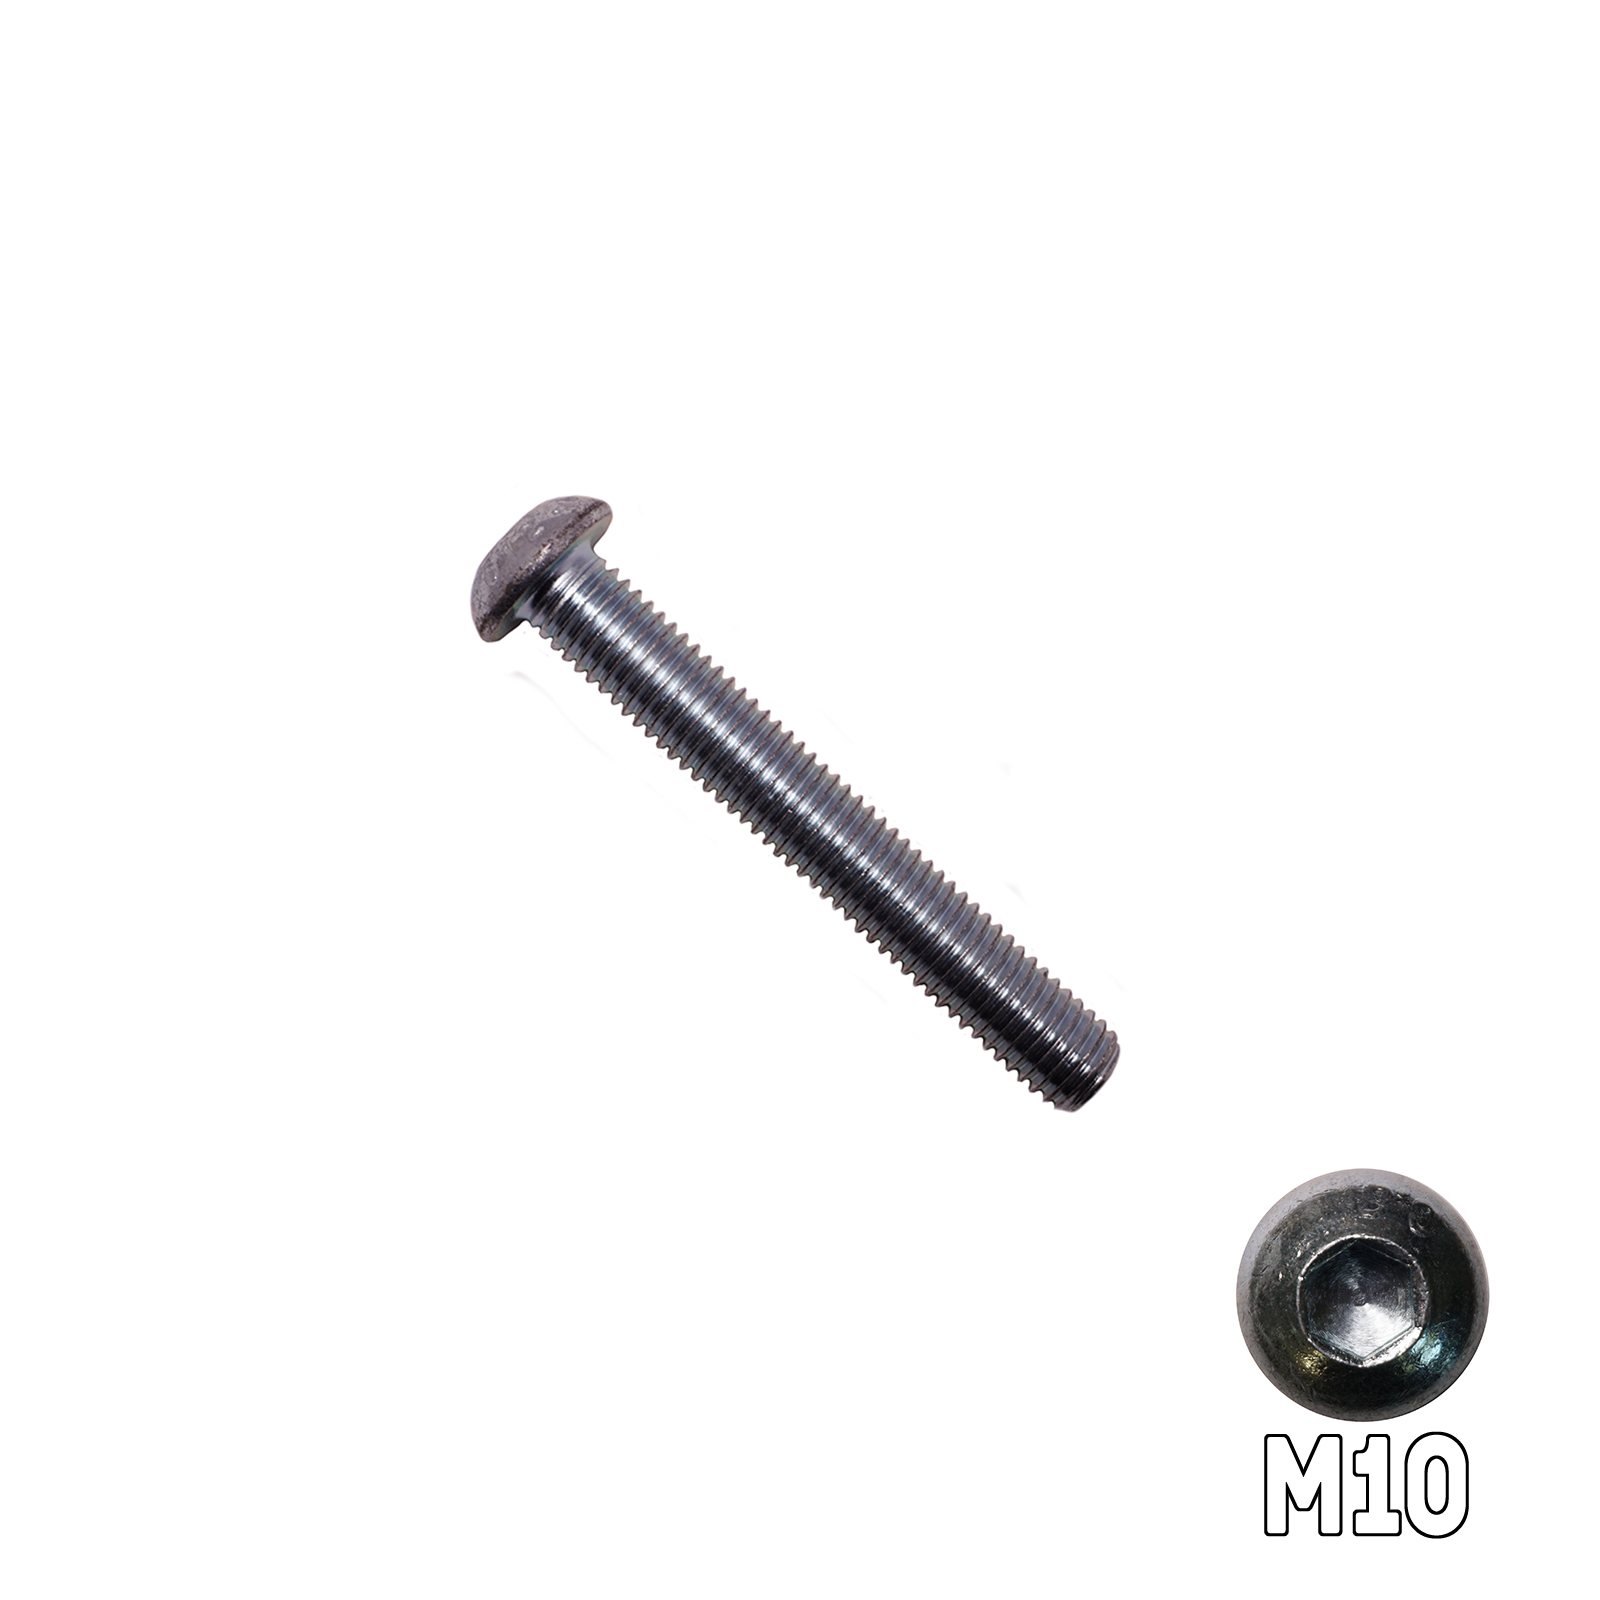 Stay in beast mode with the Button Head Bolt M10 x 70mm! Its sturdy ...